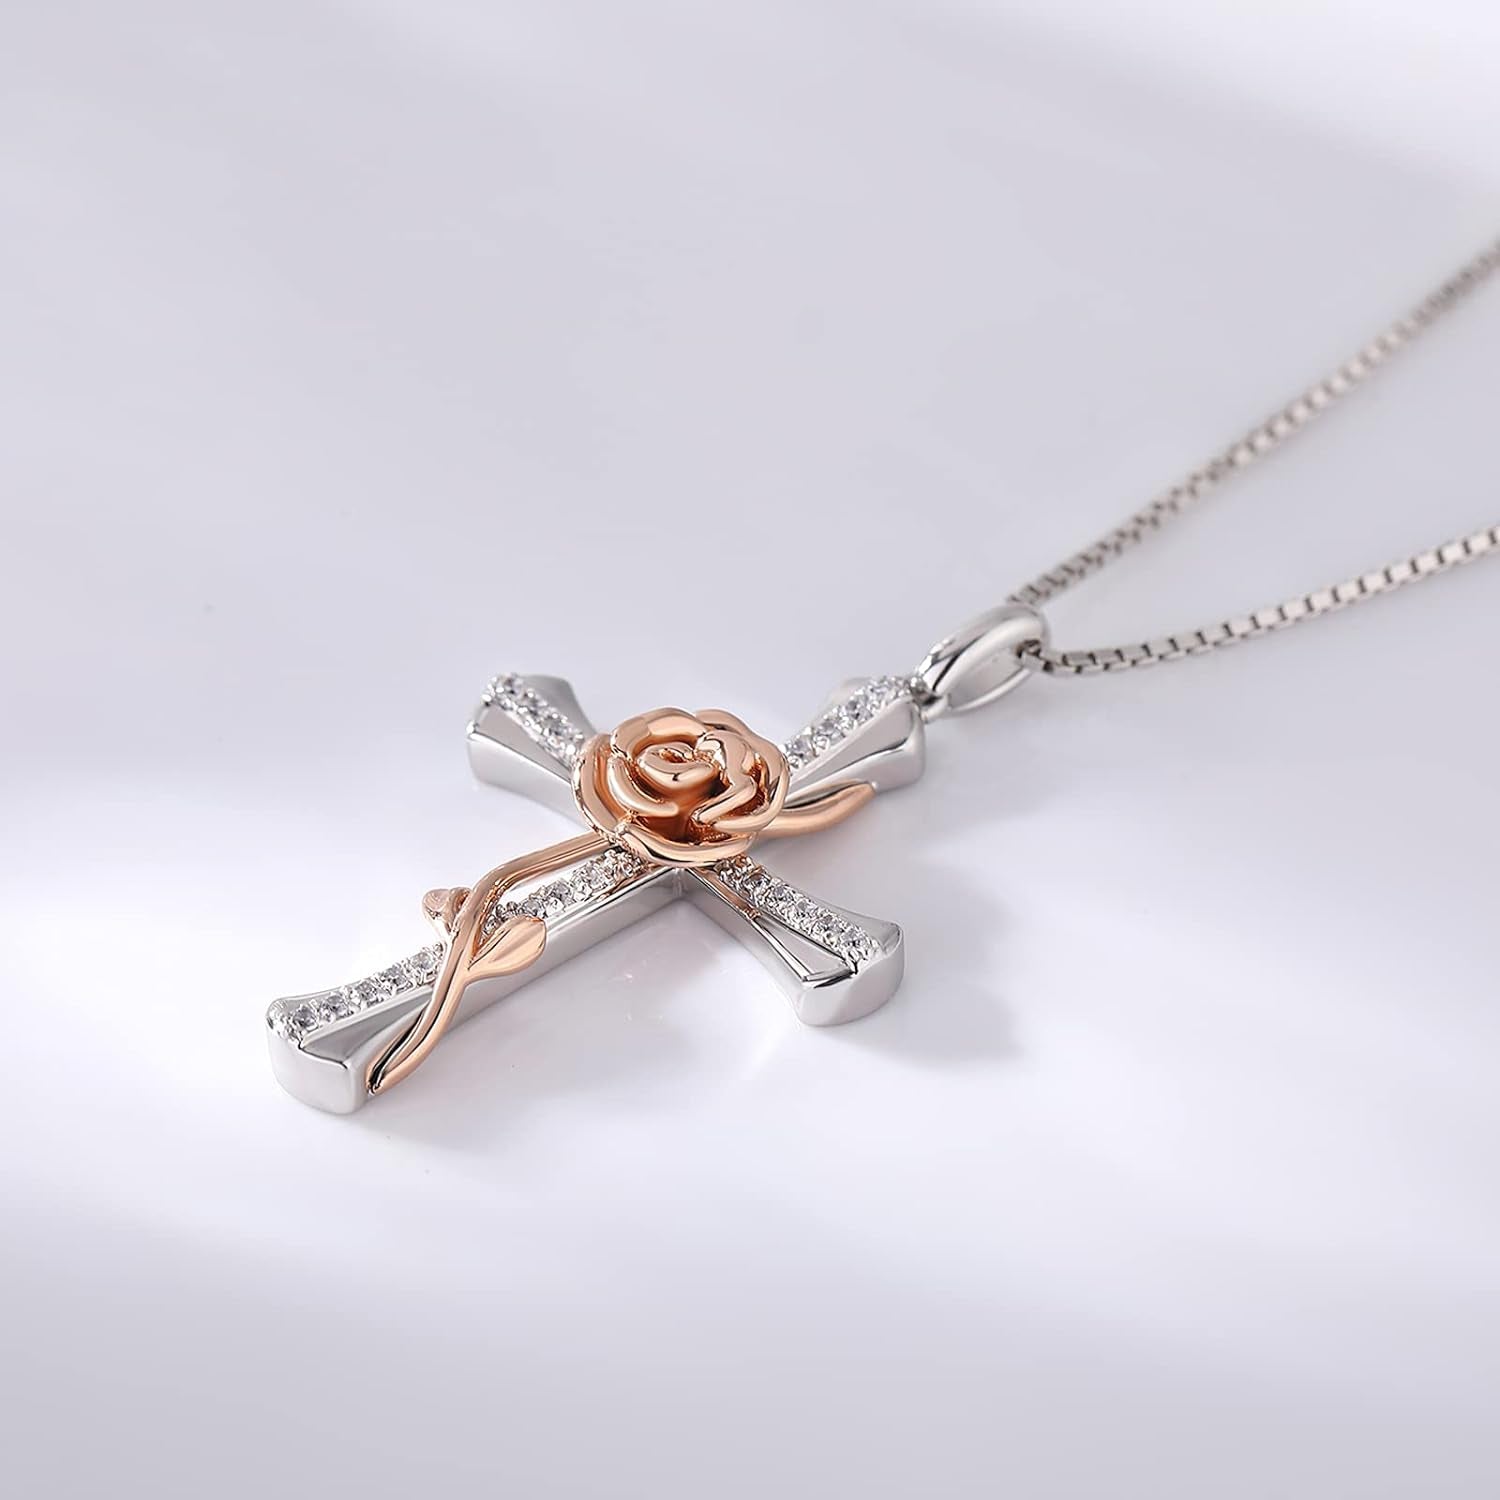 Rose Cross Necklace for Women 925 Sterling Silver Infinity Cross Pendant with Birthstone Cubic Zirconia, Cross Jewelry Gift for Women Mom Girlfriend, with Gift Box